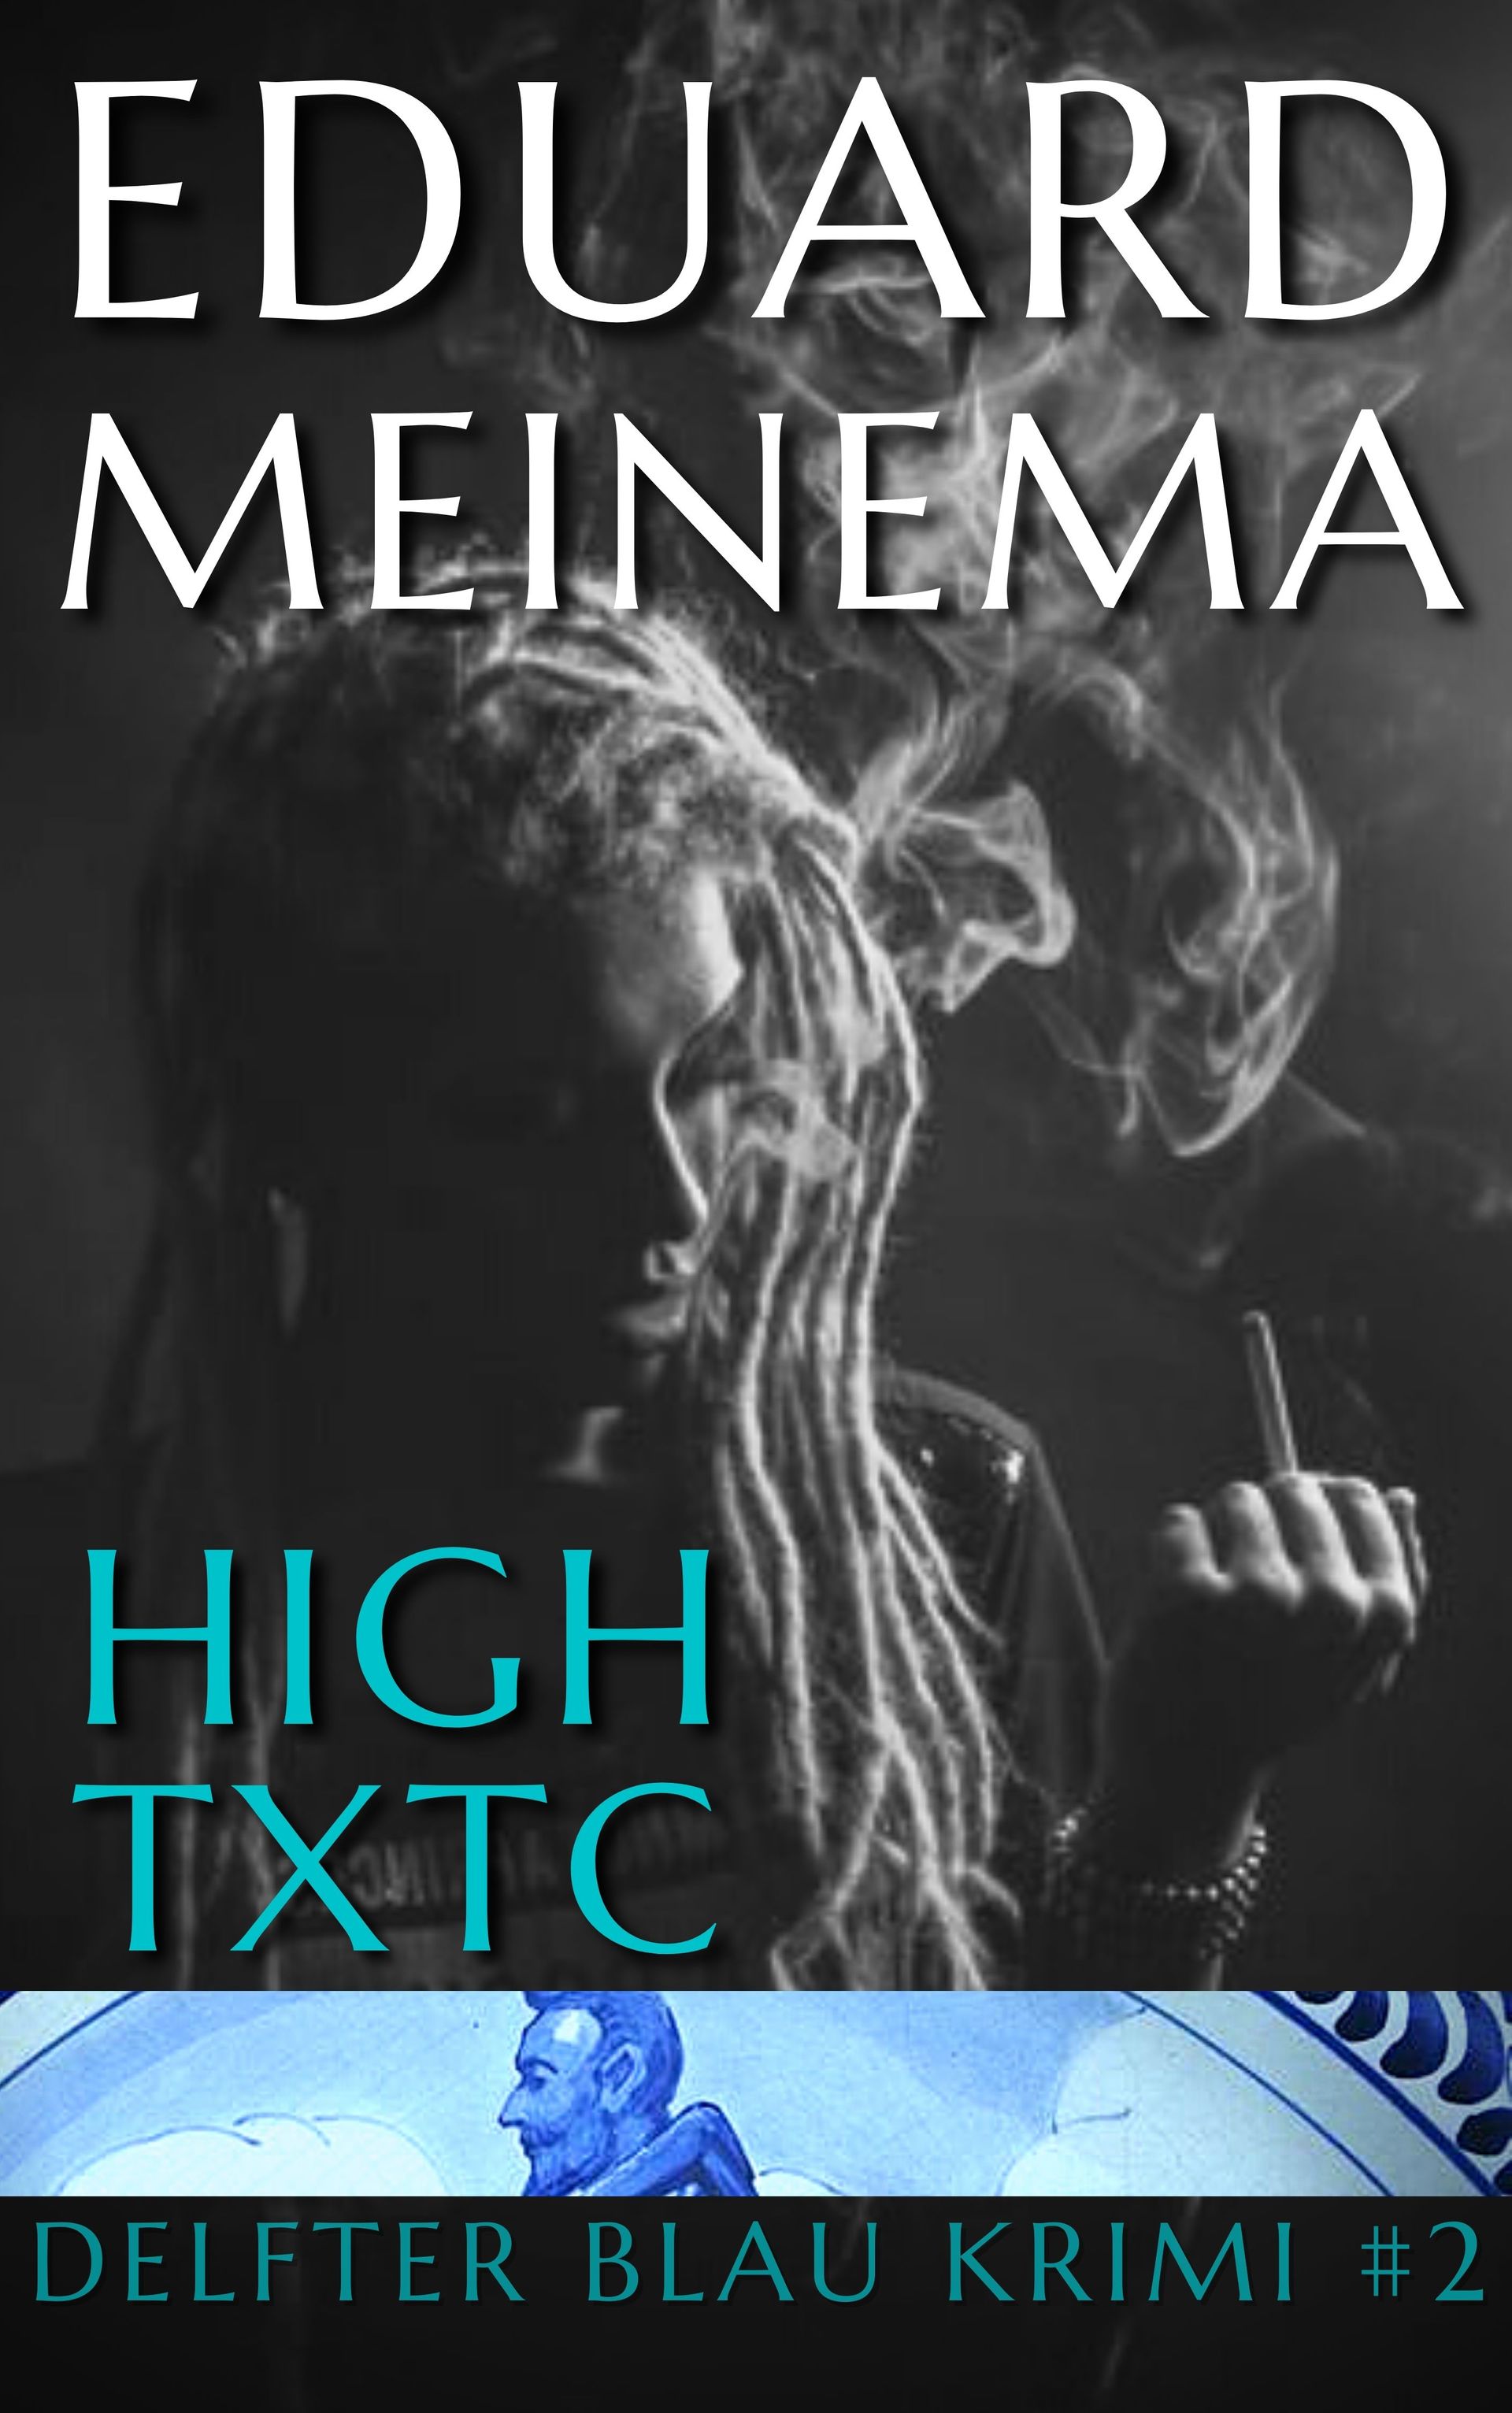 Delft Blue Crimes #2 High TXTC by Eduard Meinema. Buy ebook now, directly from the author.